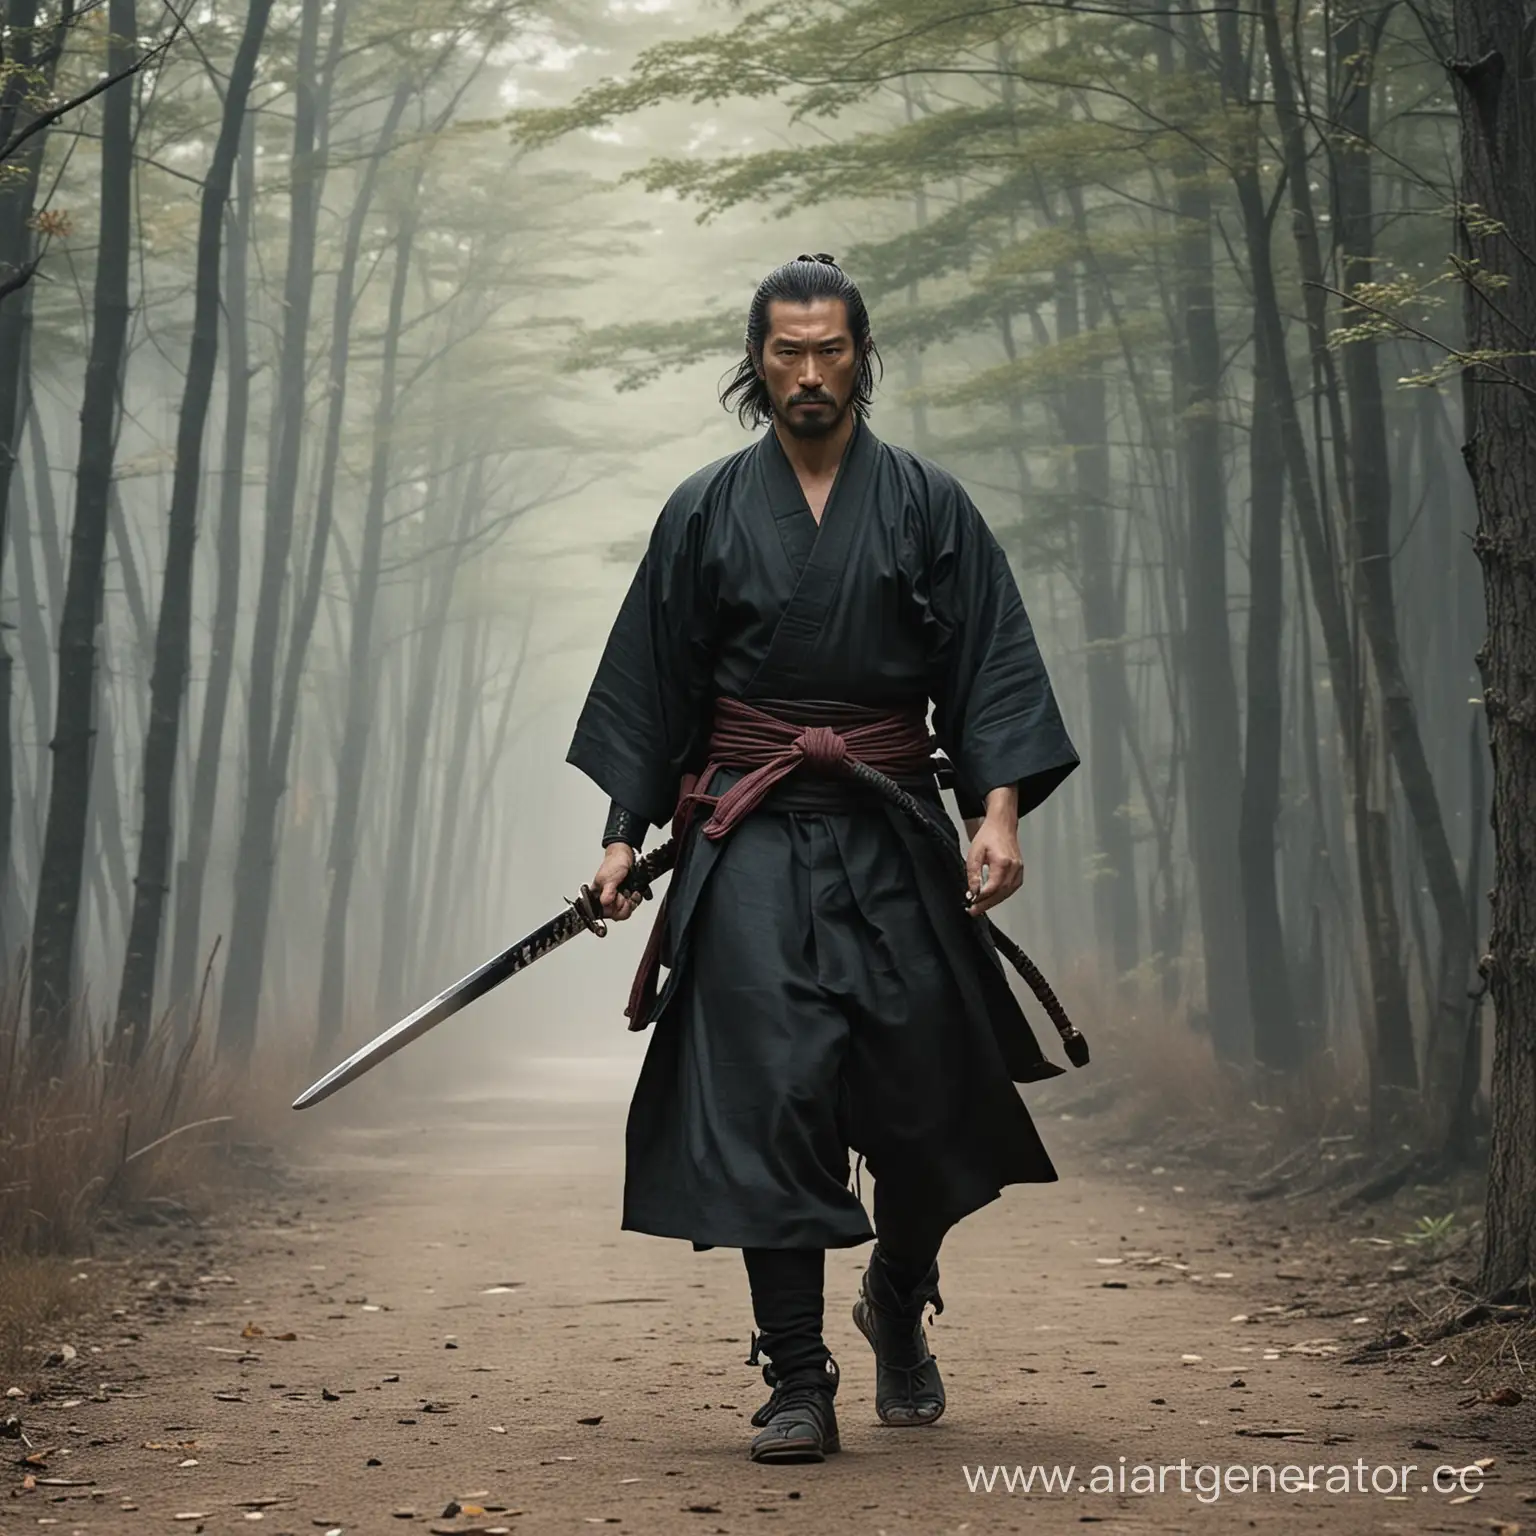 Honorable-Samurai-Engaged-in-Traditional-Combat-Training